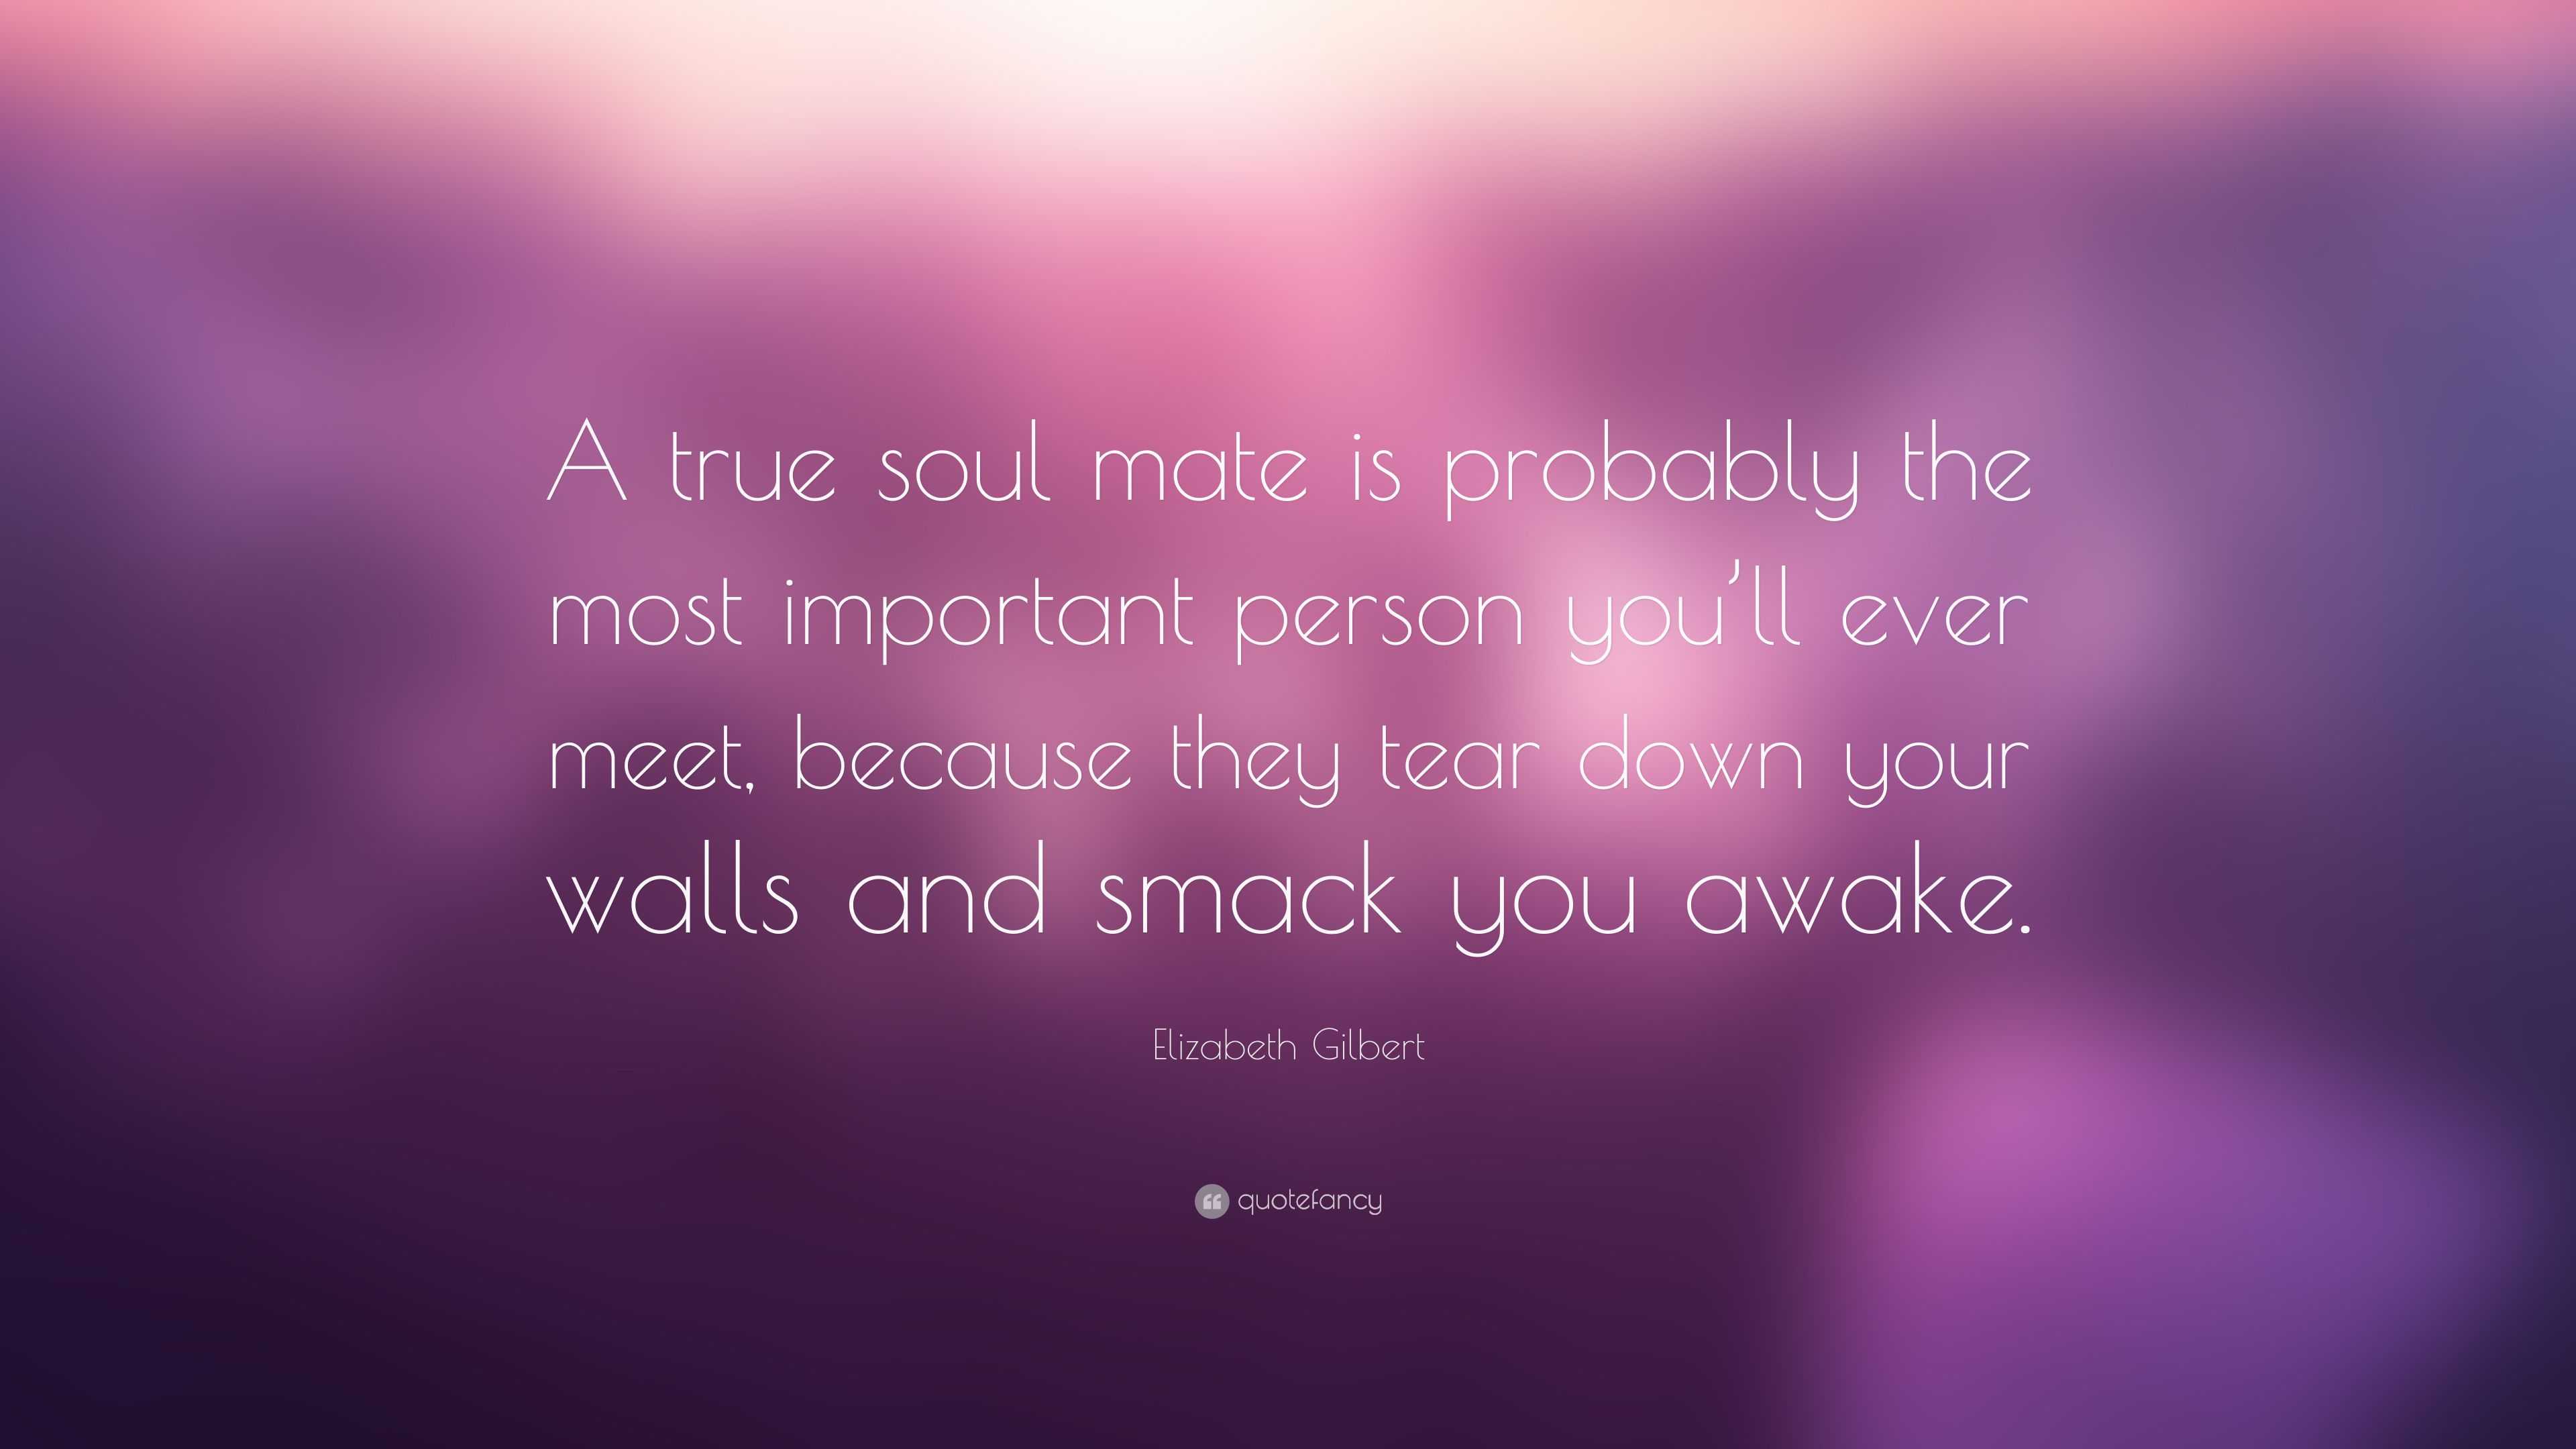 Elizabeth Gilbert Quote: “A true soul mate is probably the most ...